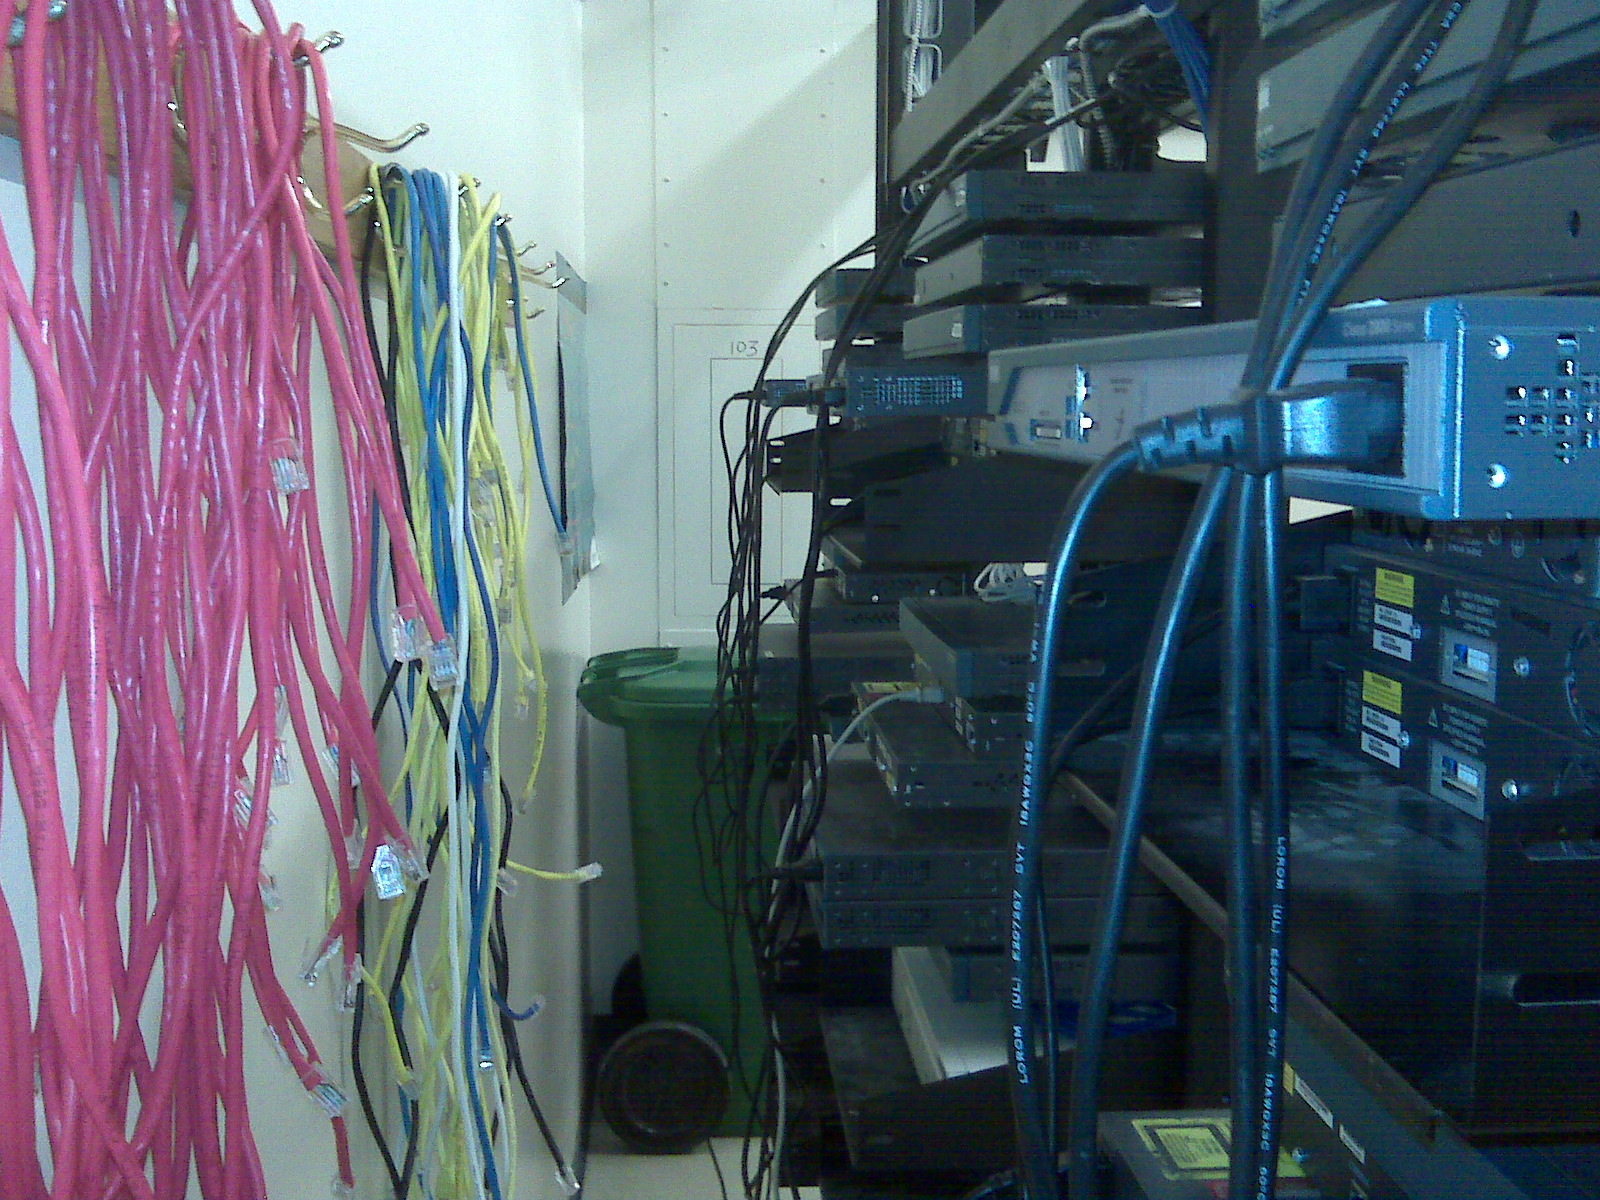 Cisco classroom network racks with cables to be used for labs.